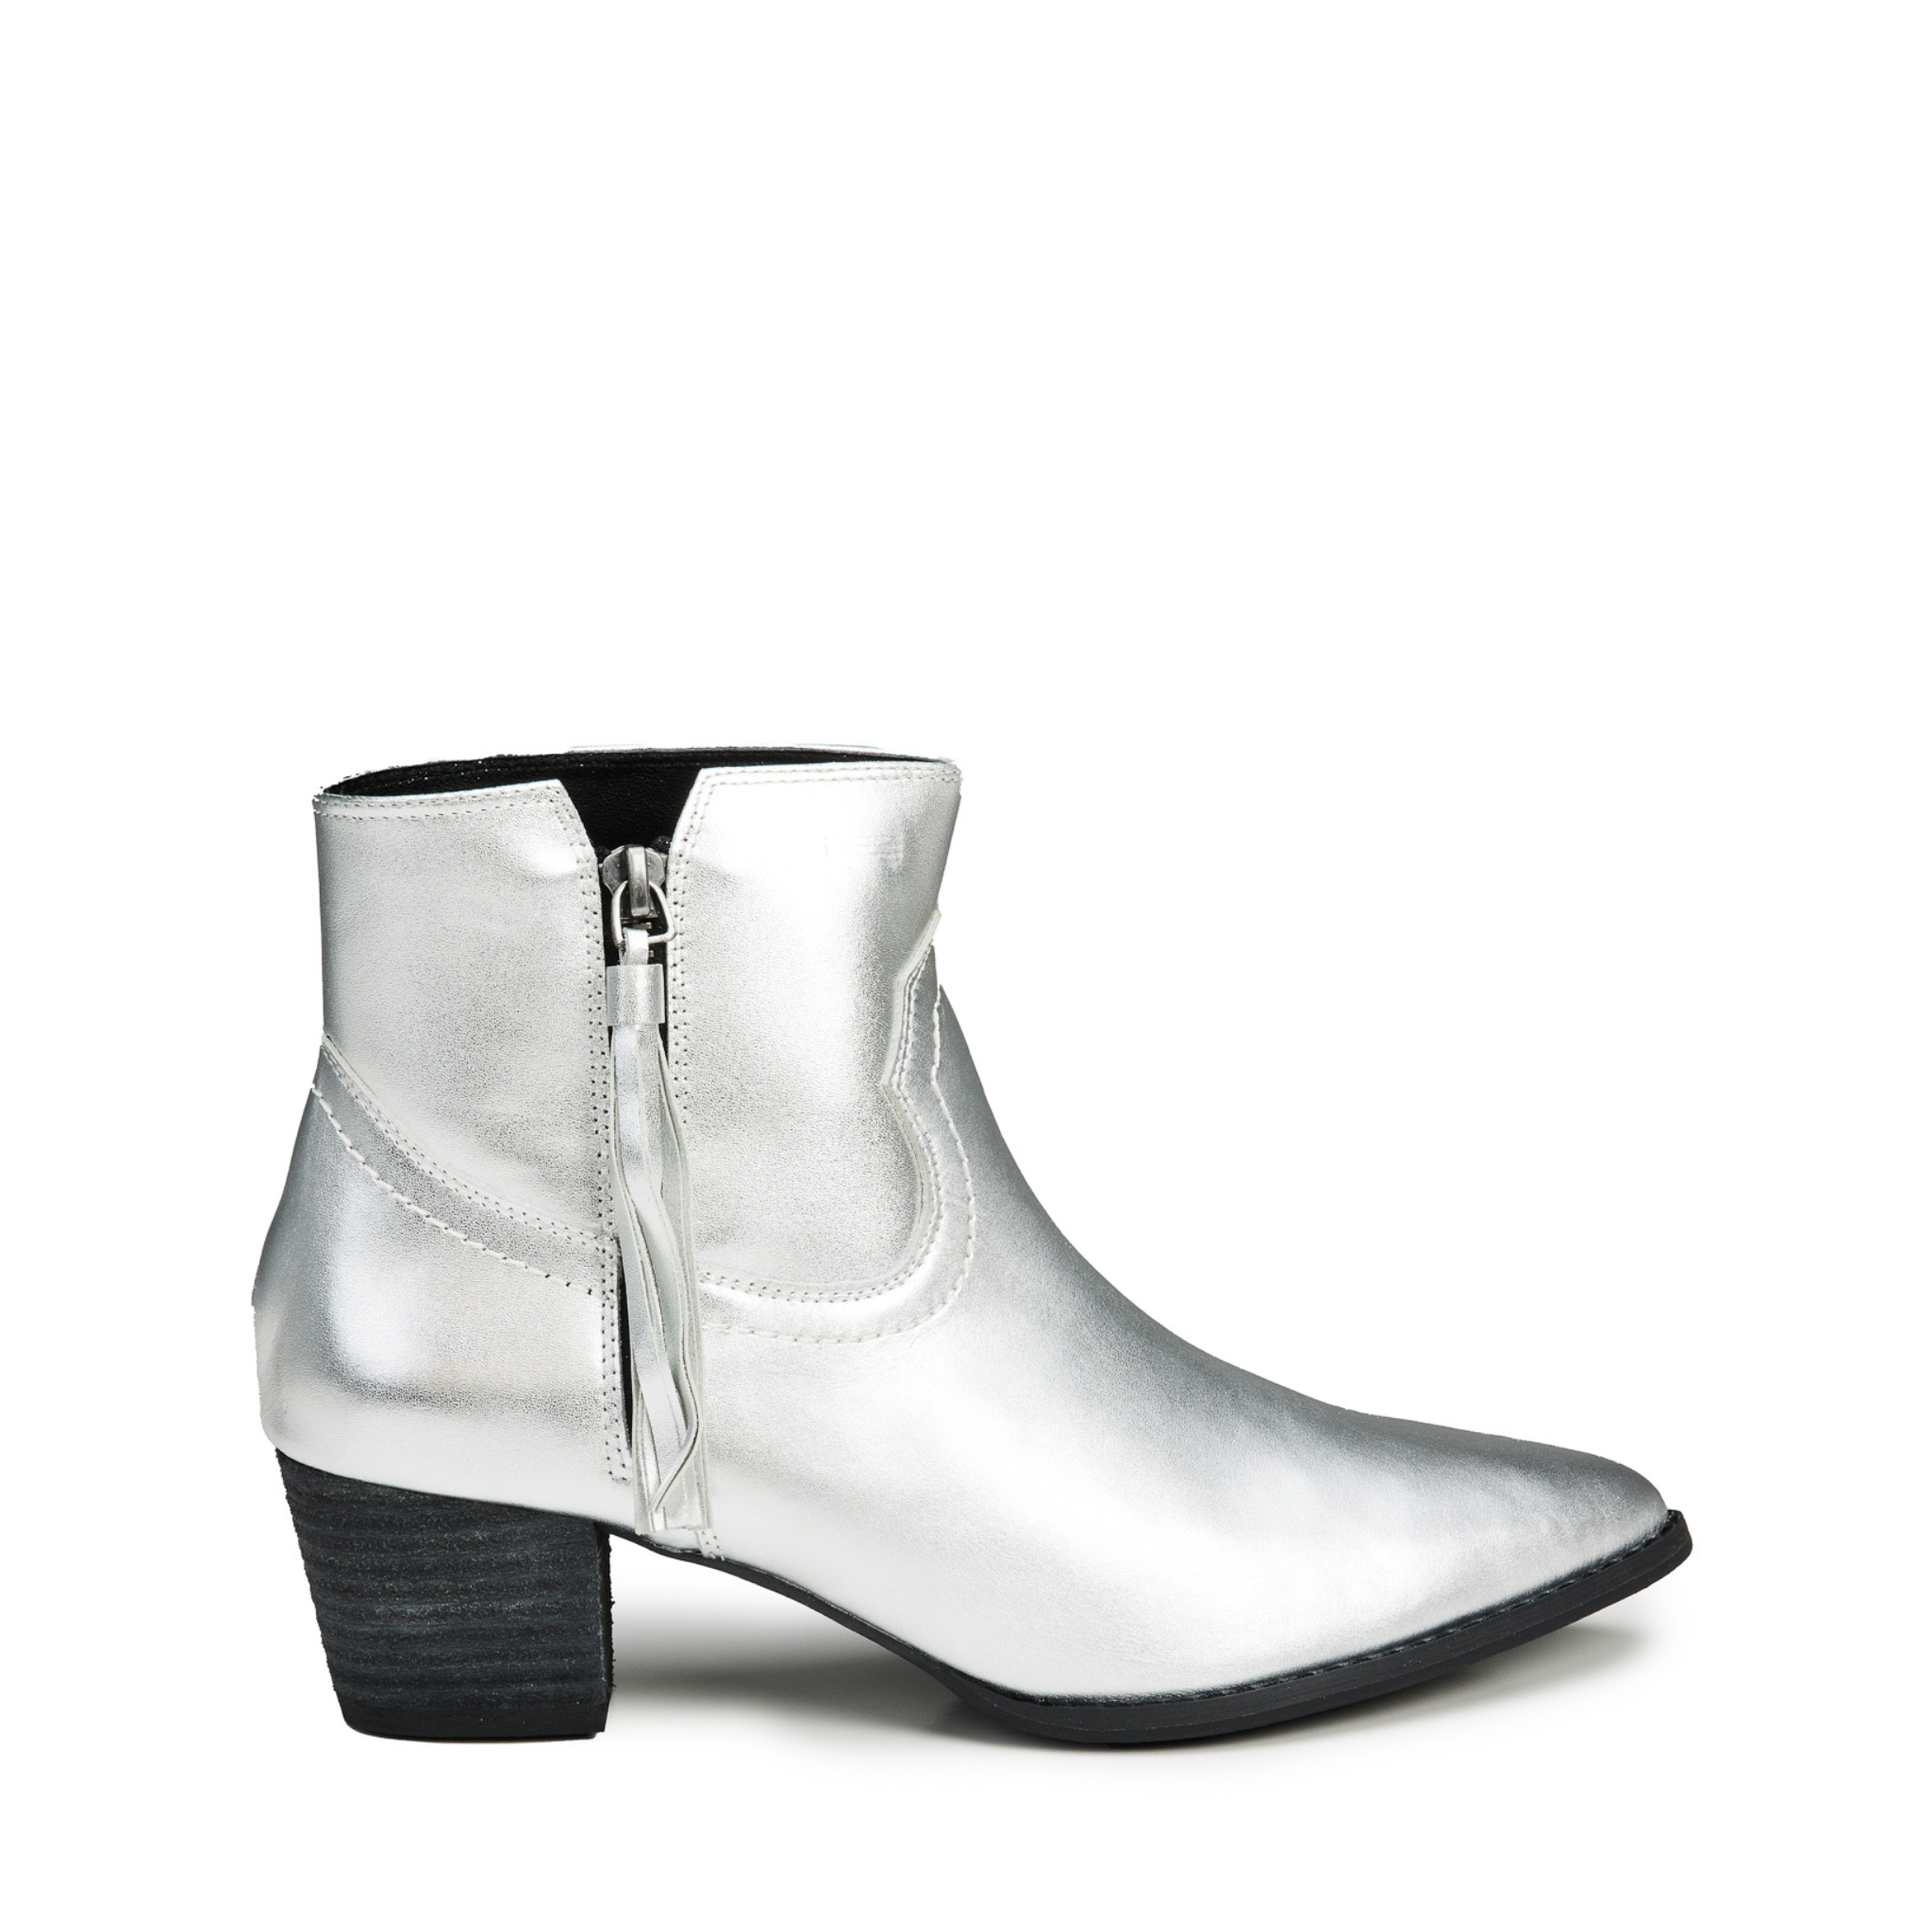 Mila Leather Low Block Heel Ankle Boots